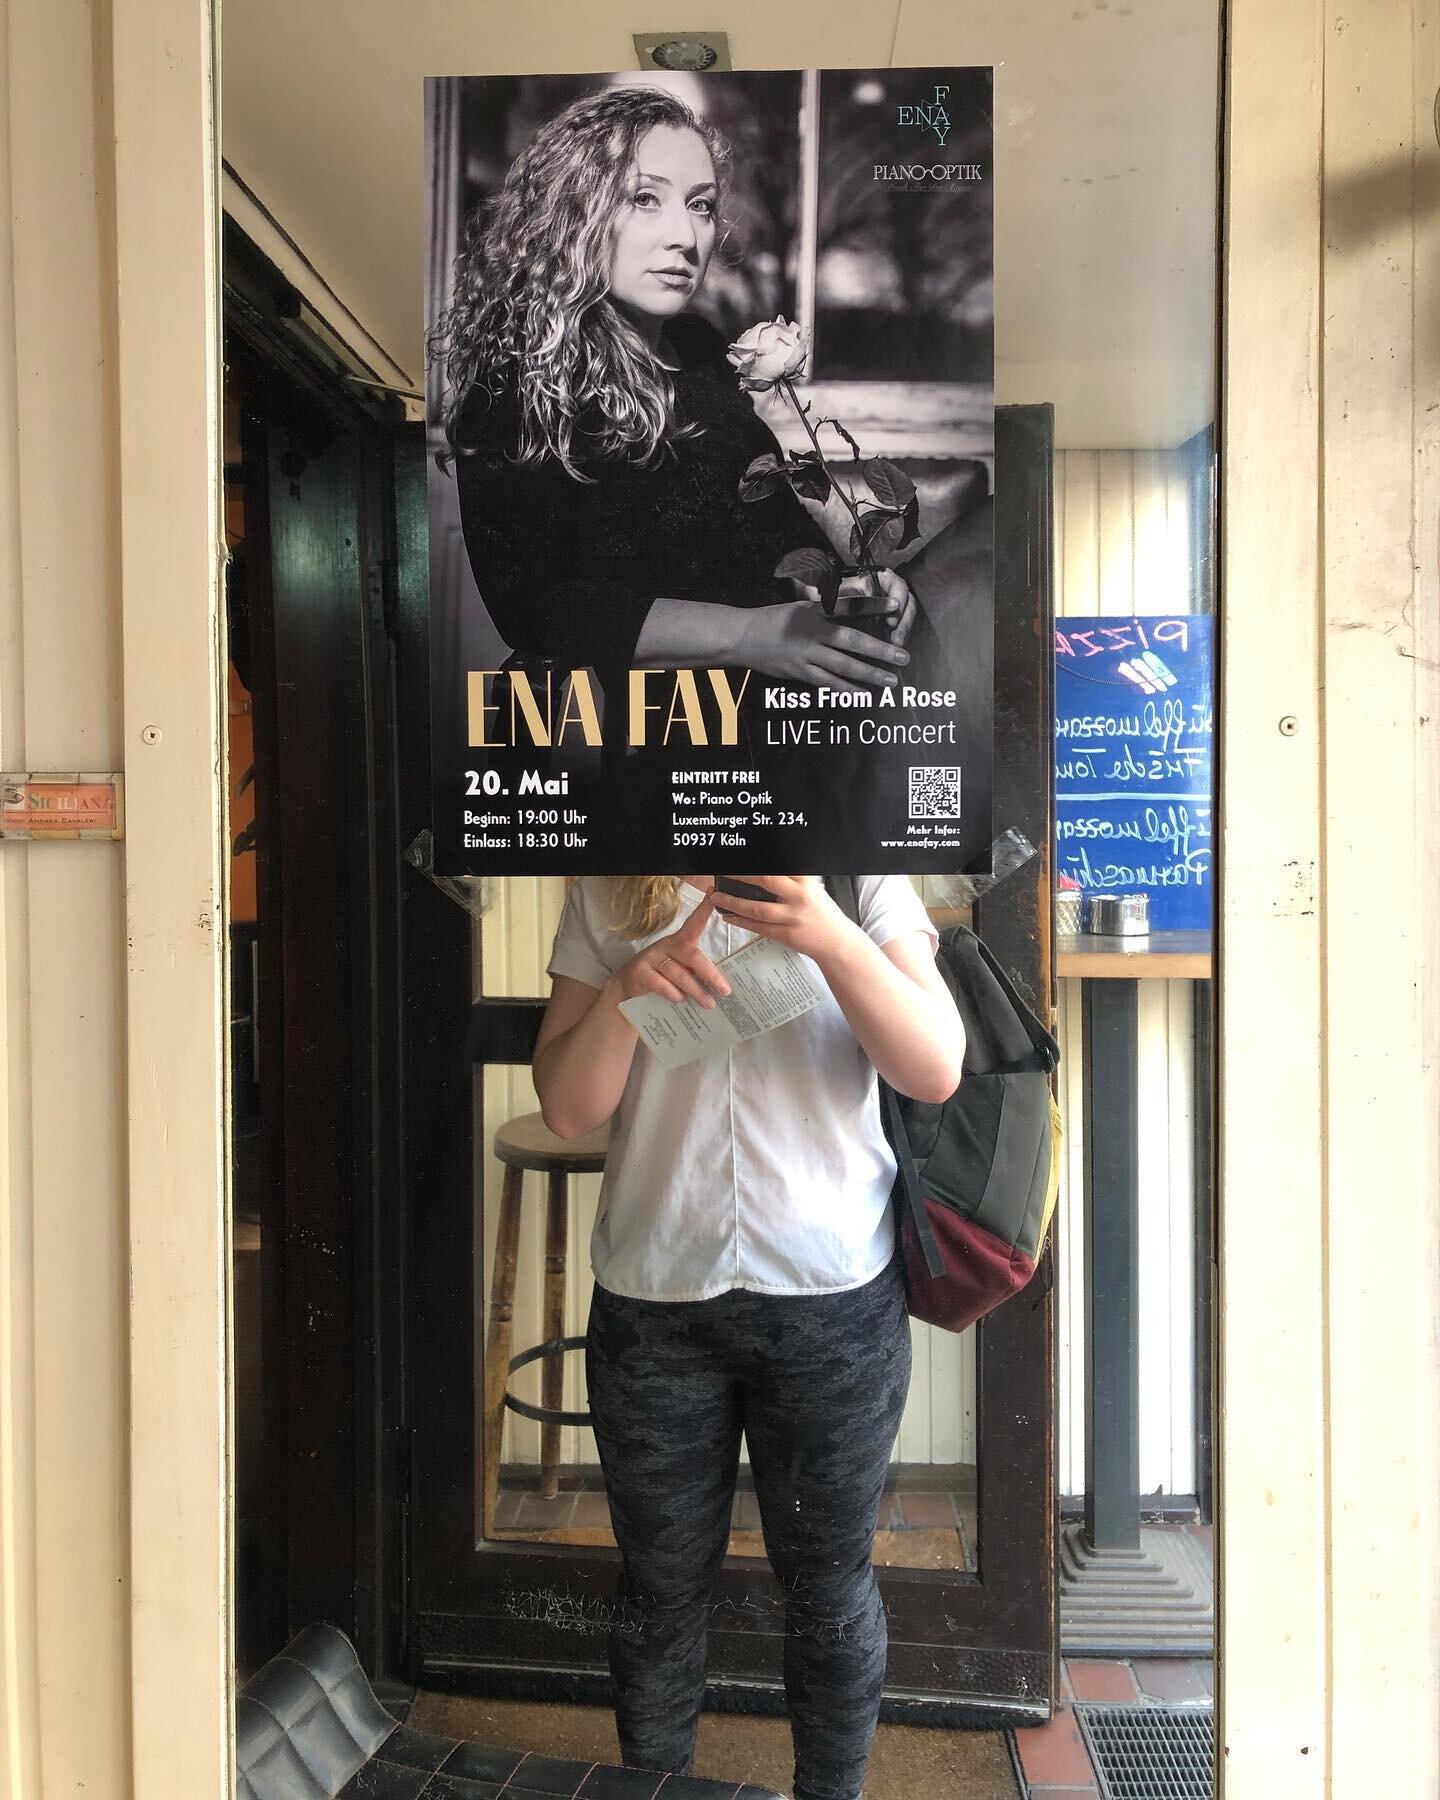 One of the jobs an independent artist has&hellip;walk from door to door and ask if you can put up a poster of yourself 🤪🤟🏻 

People in S&uuml;lz are super friendly though, I got them up in no time! Thanks for the support, and I hope to see many of